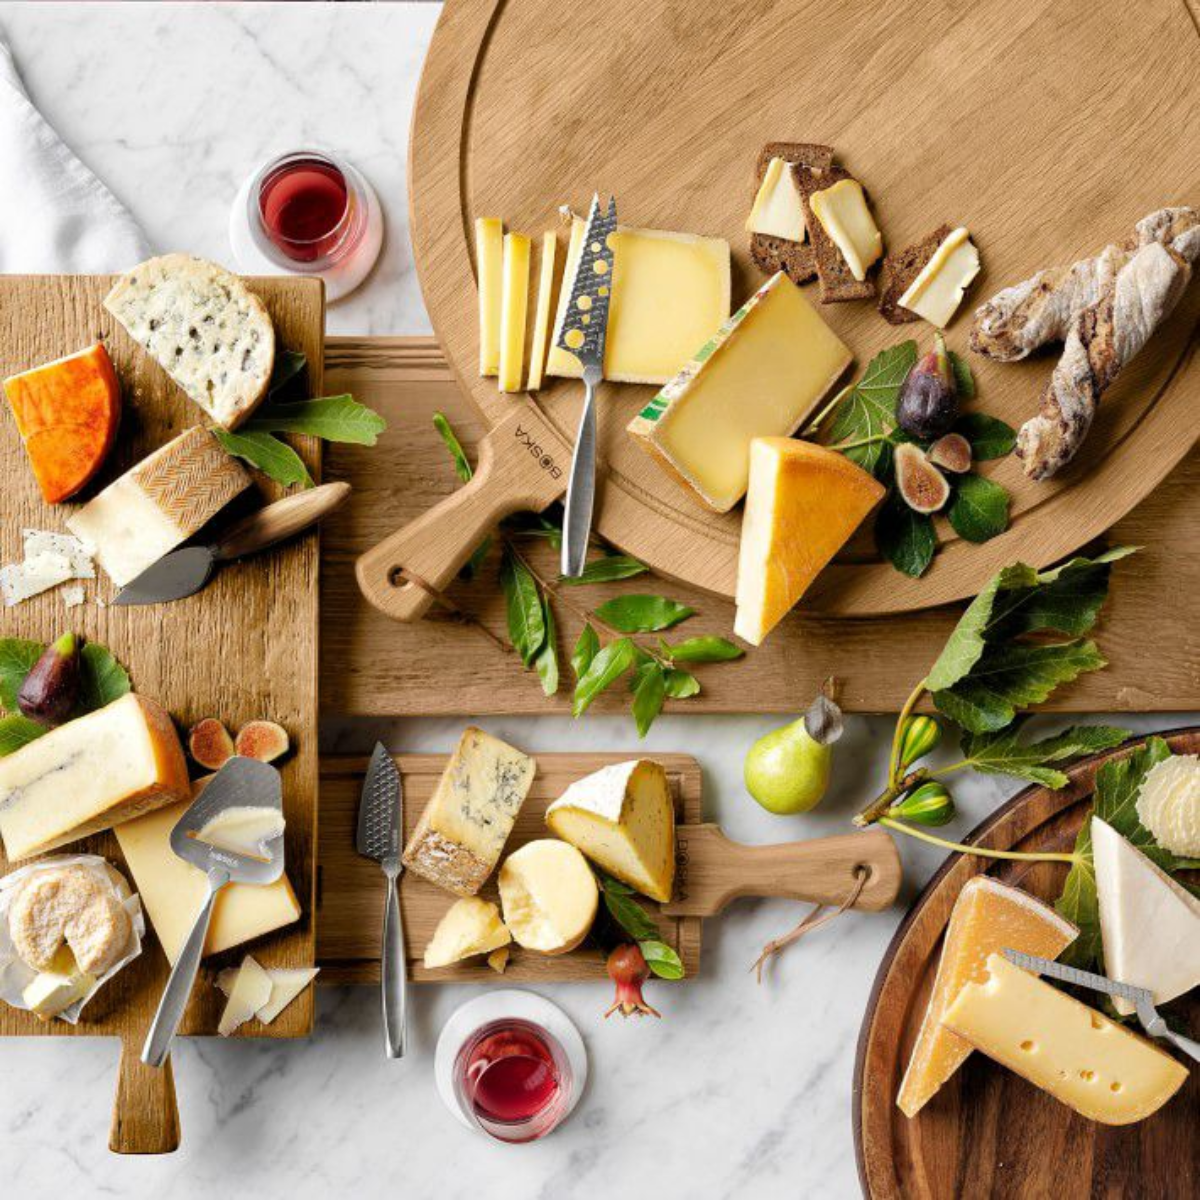 30. Artisanal Cheese Board Set: The Perfect Unique Anniversary Gift for Him